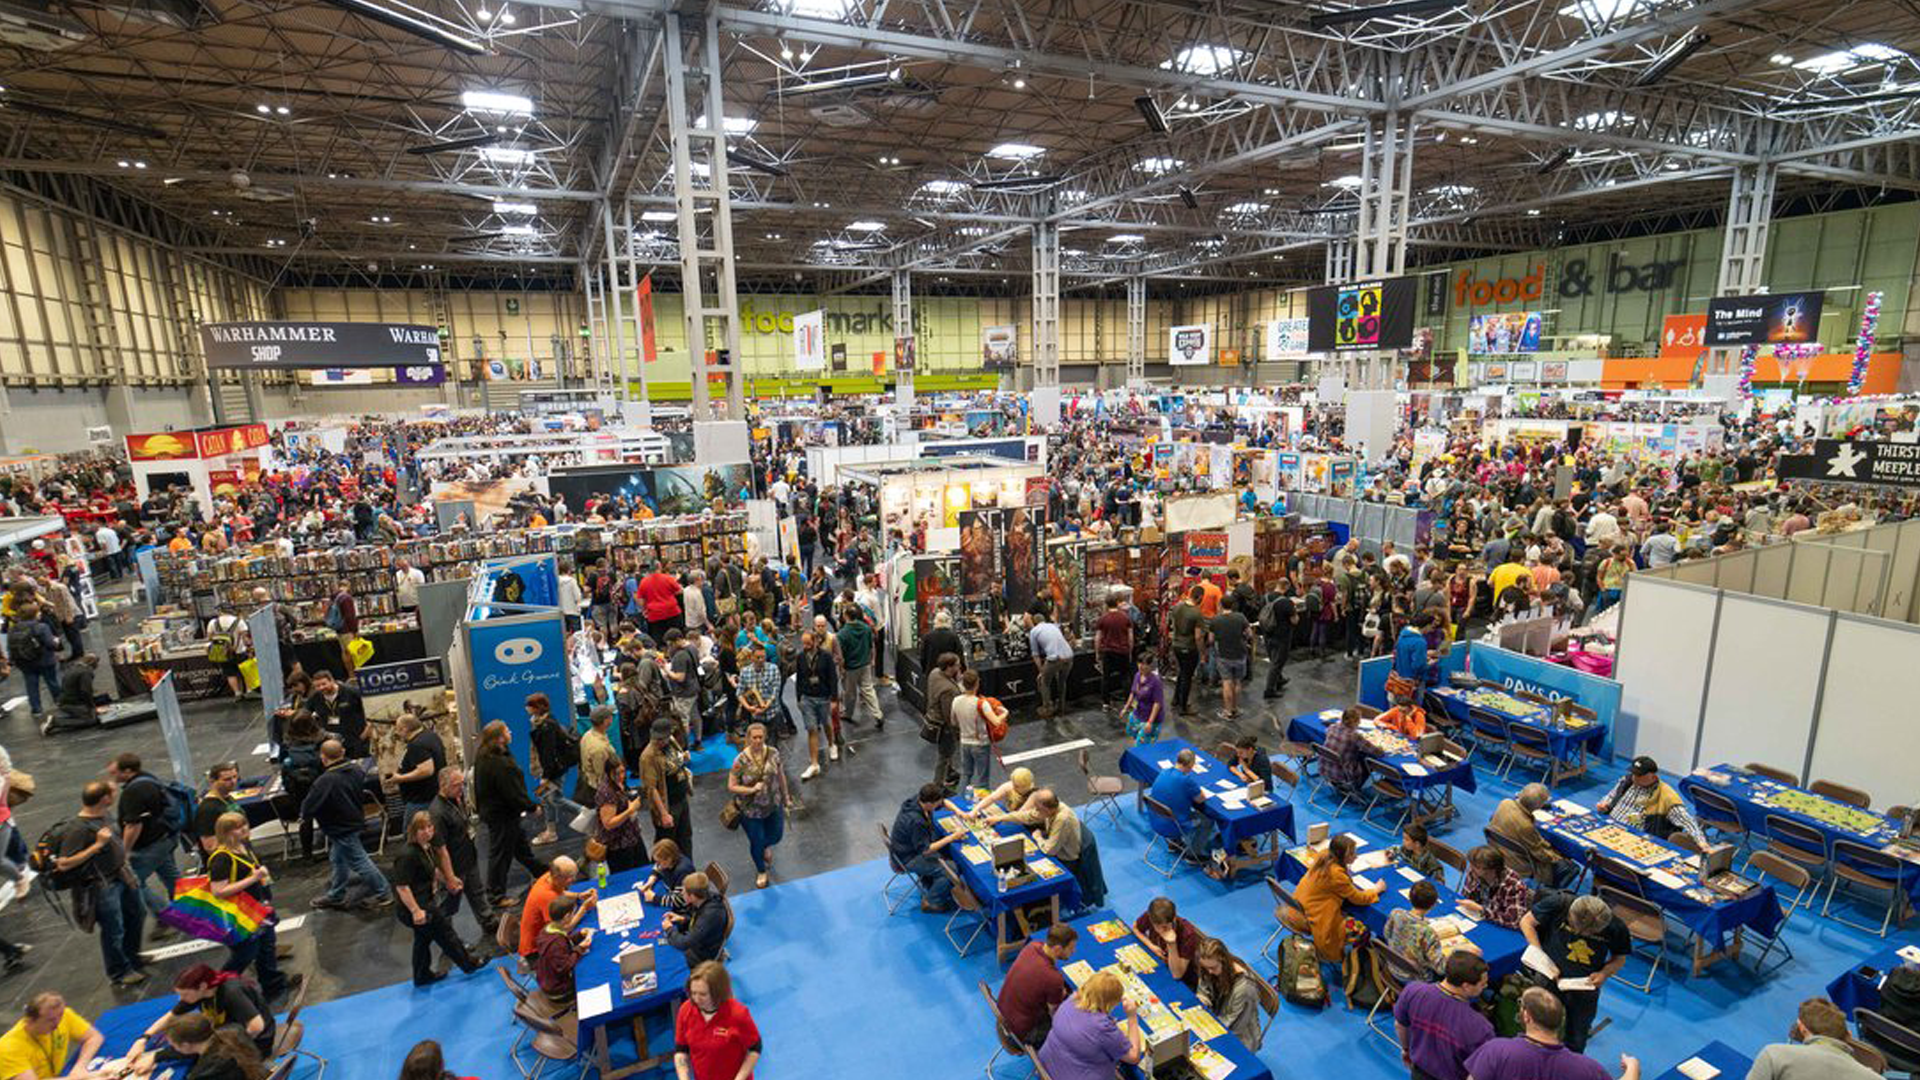 An image of the show floor for the UK Games Expo convention